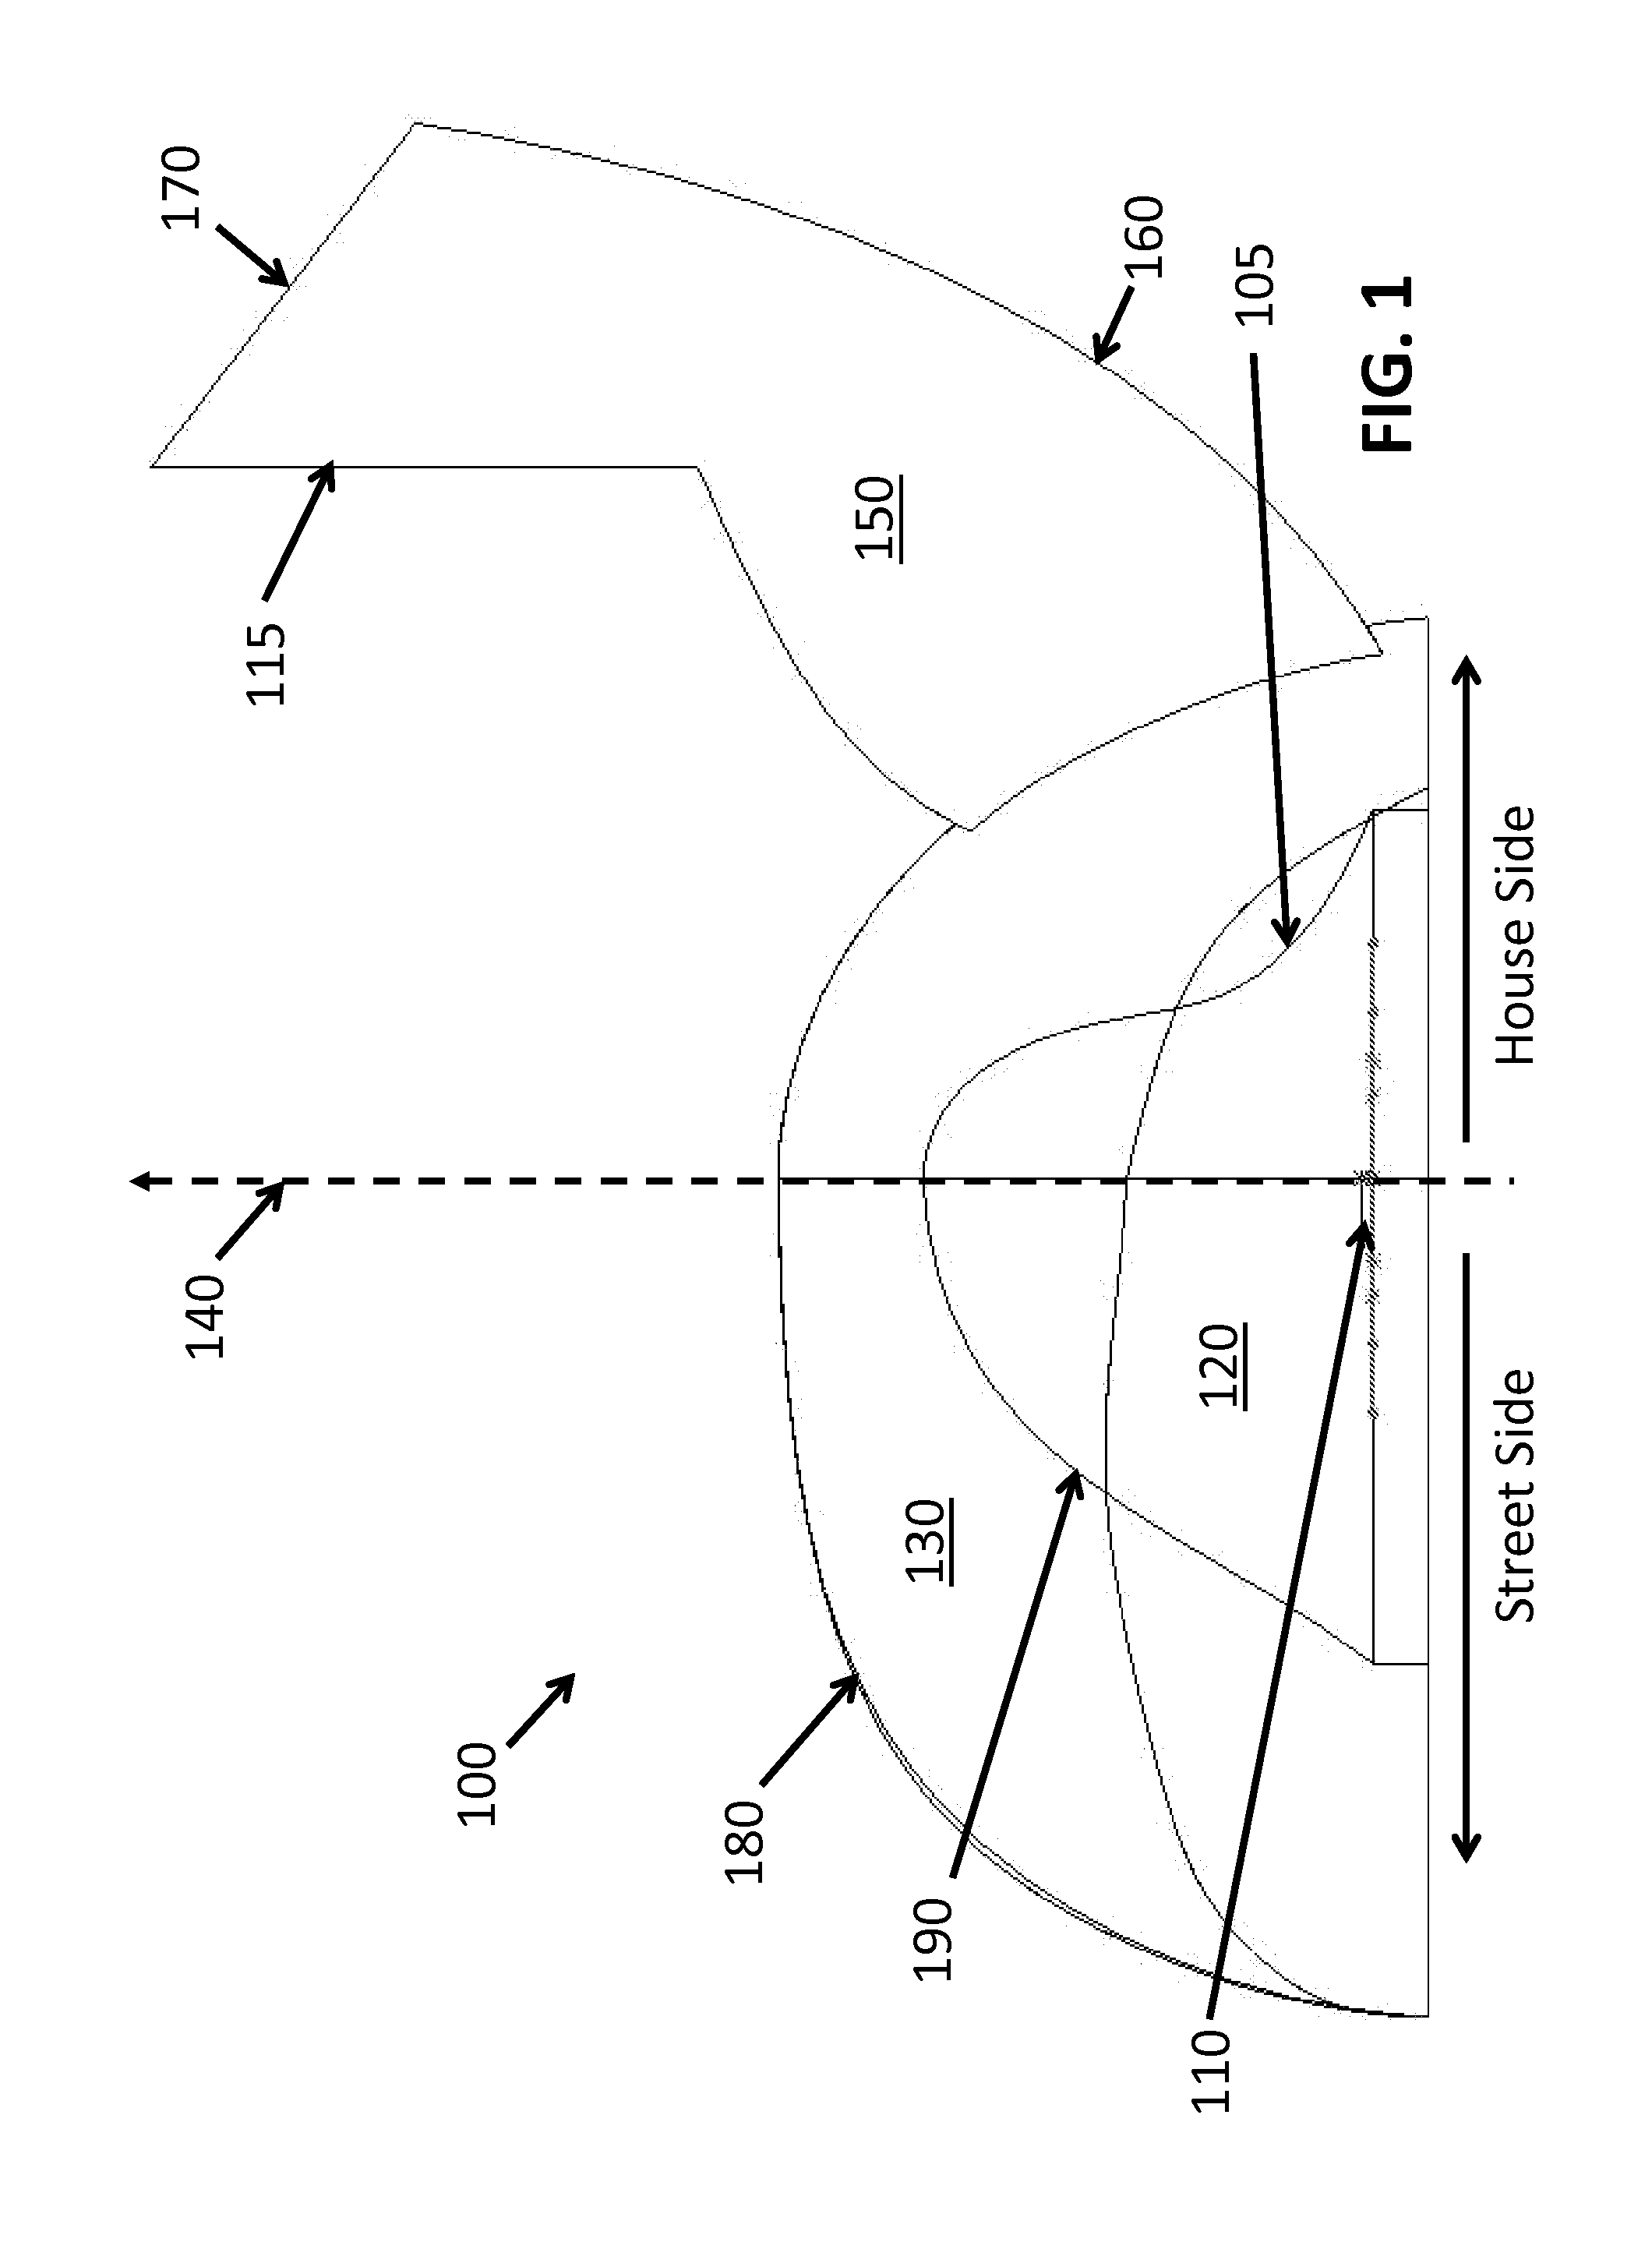 Method and System for Redirecting Light Emitted from a Light Emitting Diode